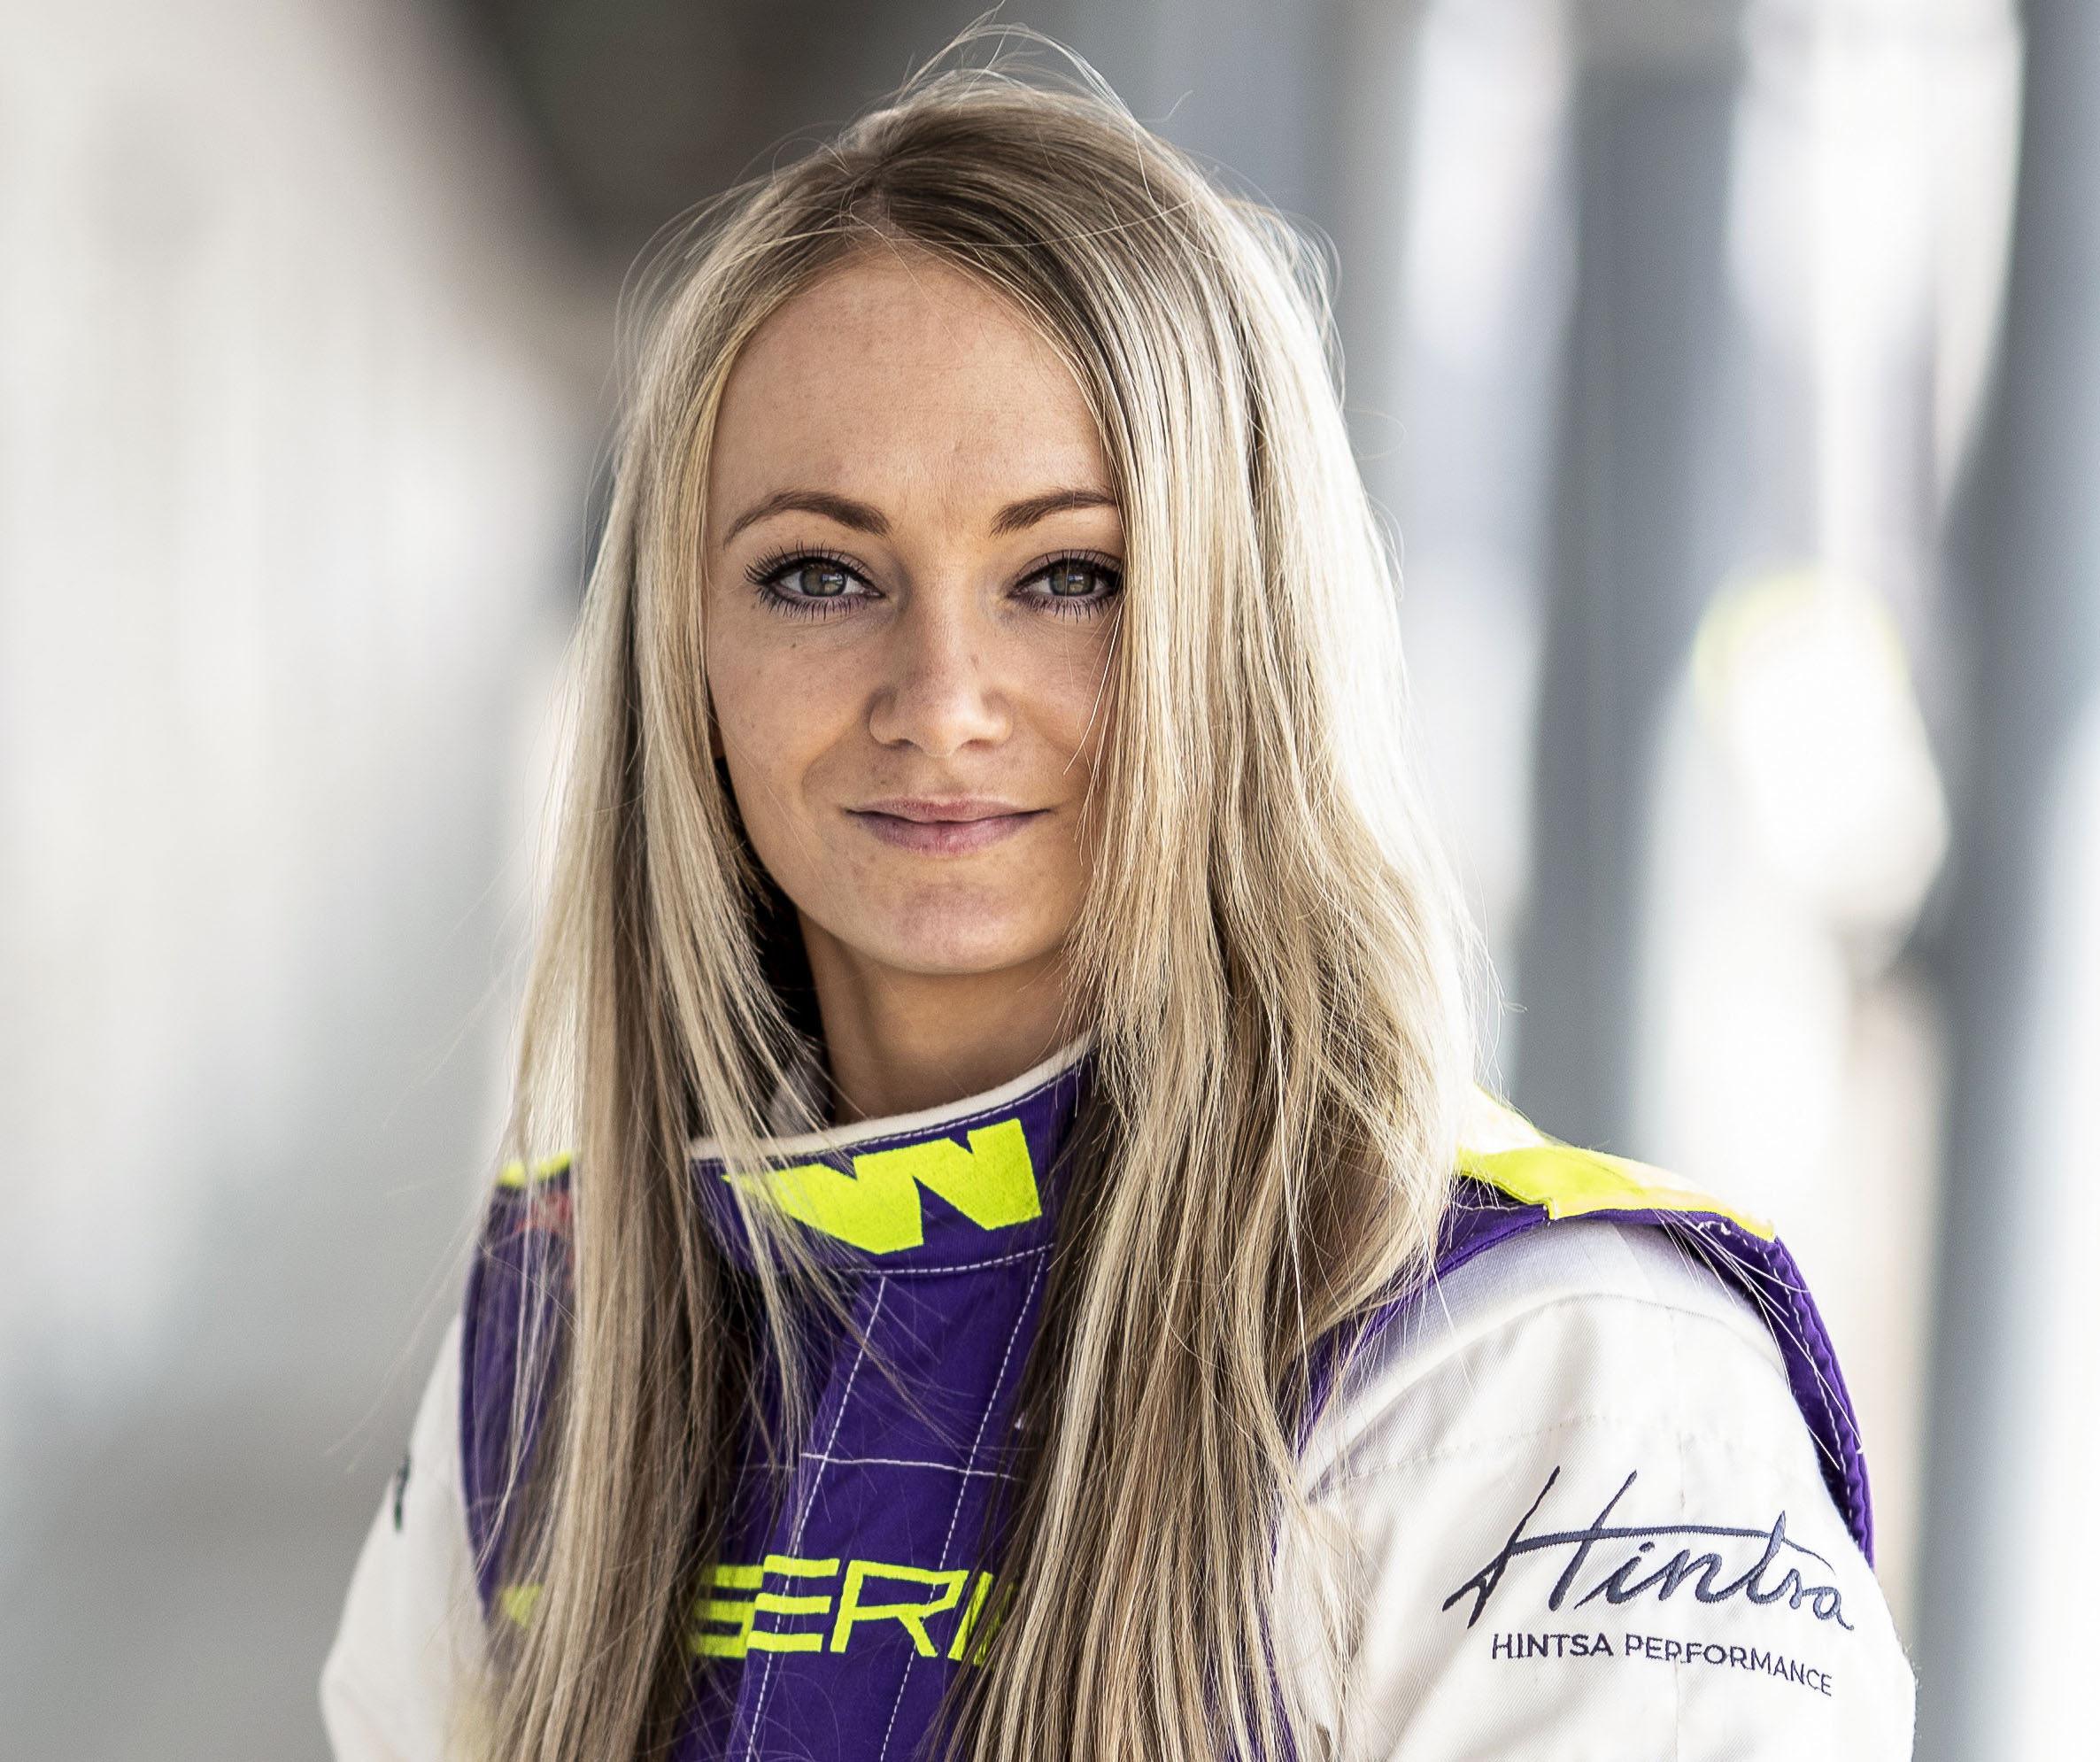 HOYERSWERDA, GERMANY - APRIL 16: Driver Jessica Hawkins of UK poses for a photo during W Series testing at Lausitzring on April 16, 2019 in Hoyerswerda, Germany. W Series aims to give female drivers an opportunity in motorsport that hasn’t been available to them before. The first race of the series, which encompasses six rounds on the DTM support programme, is at the Hockenheimring on May 3rd and 4th.  (Photo by Maja Hitij/Getty Images)